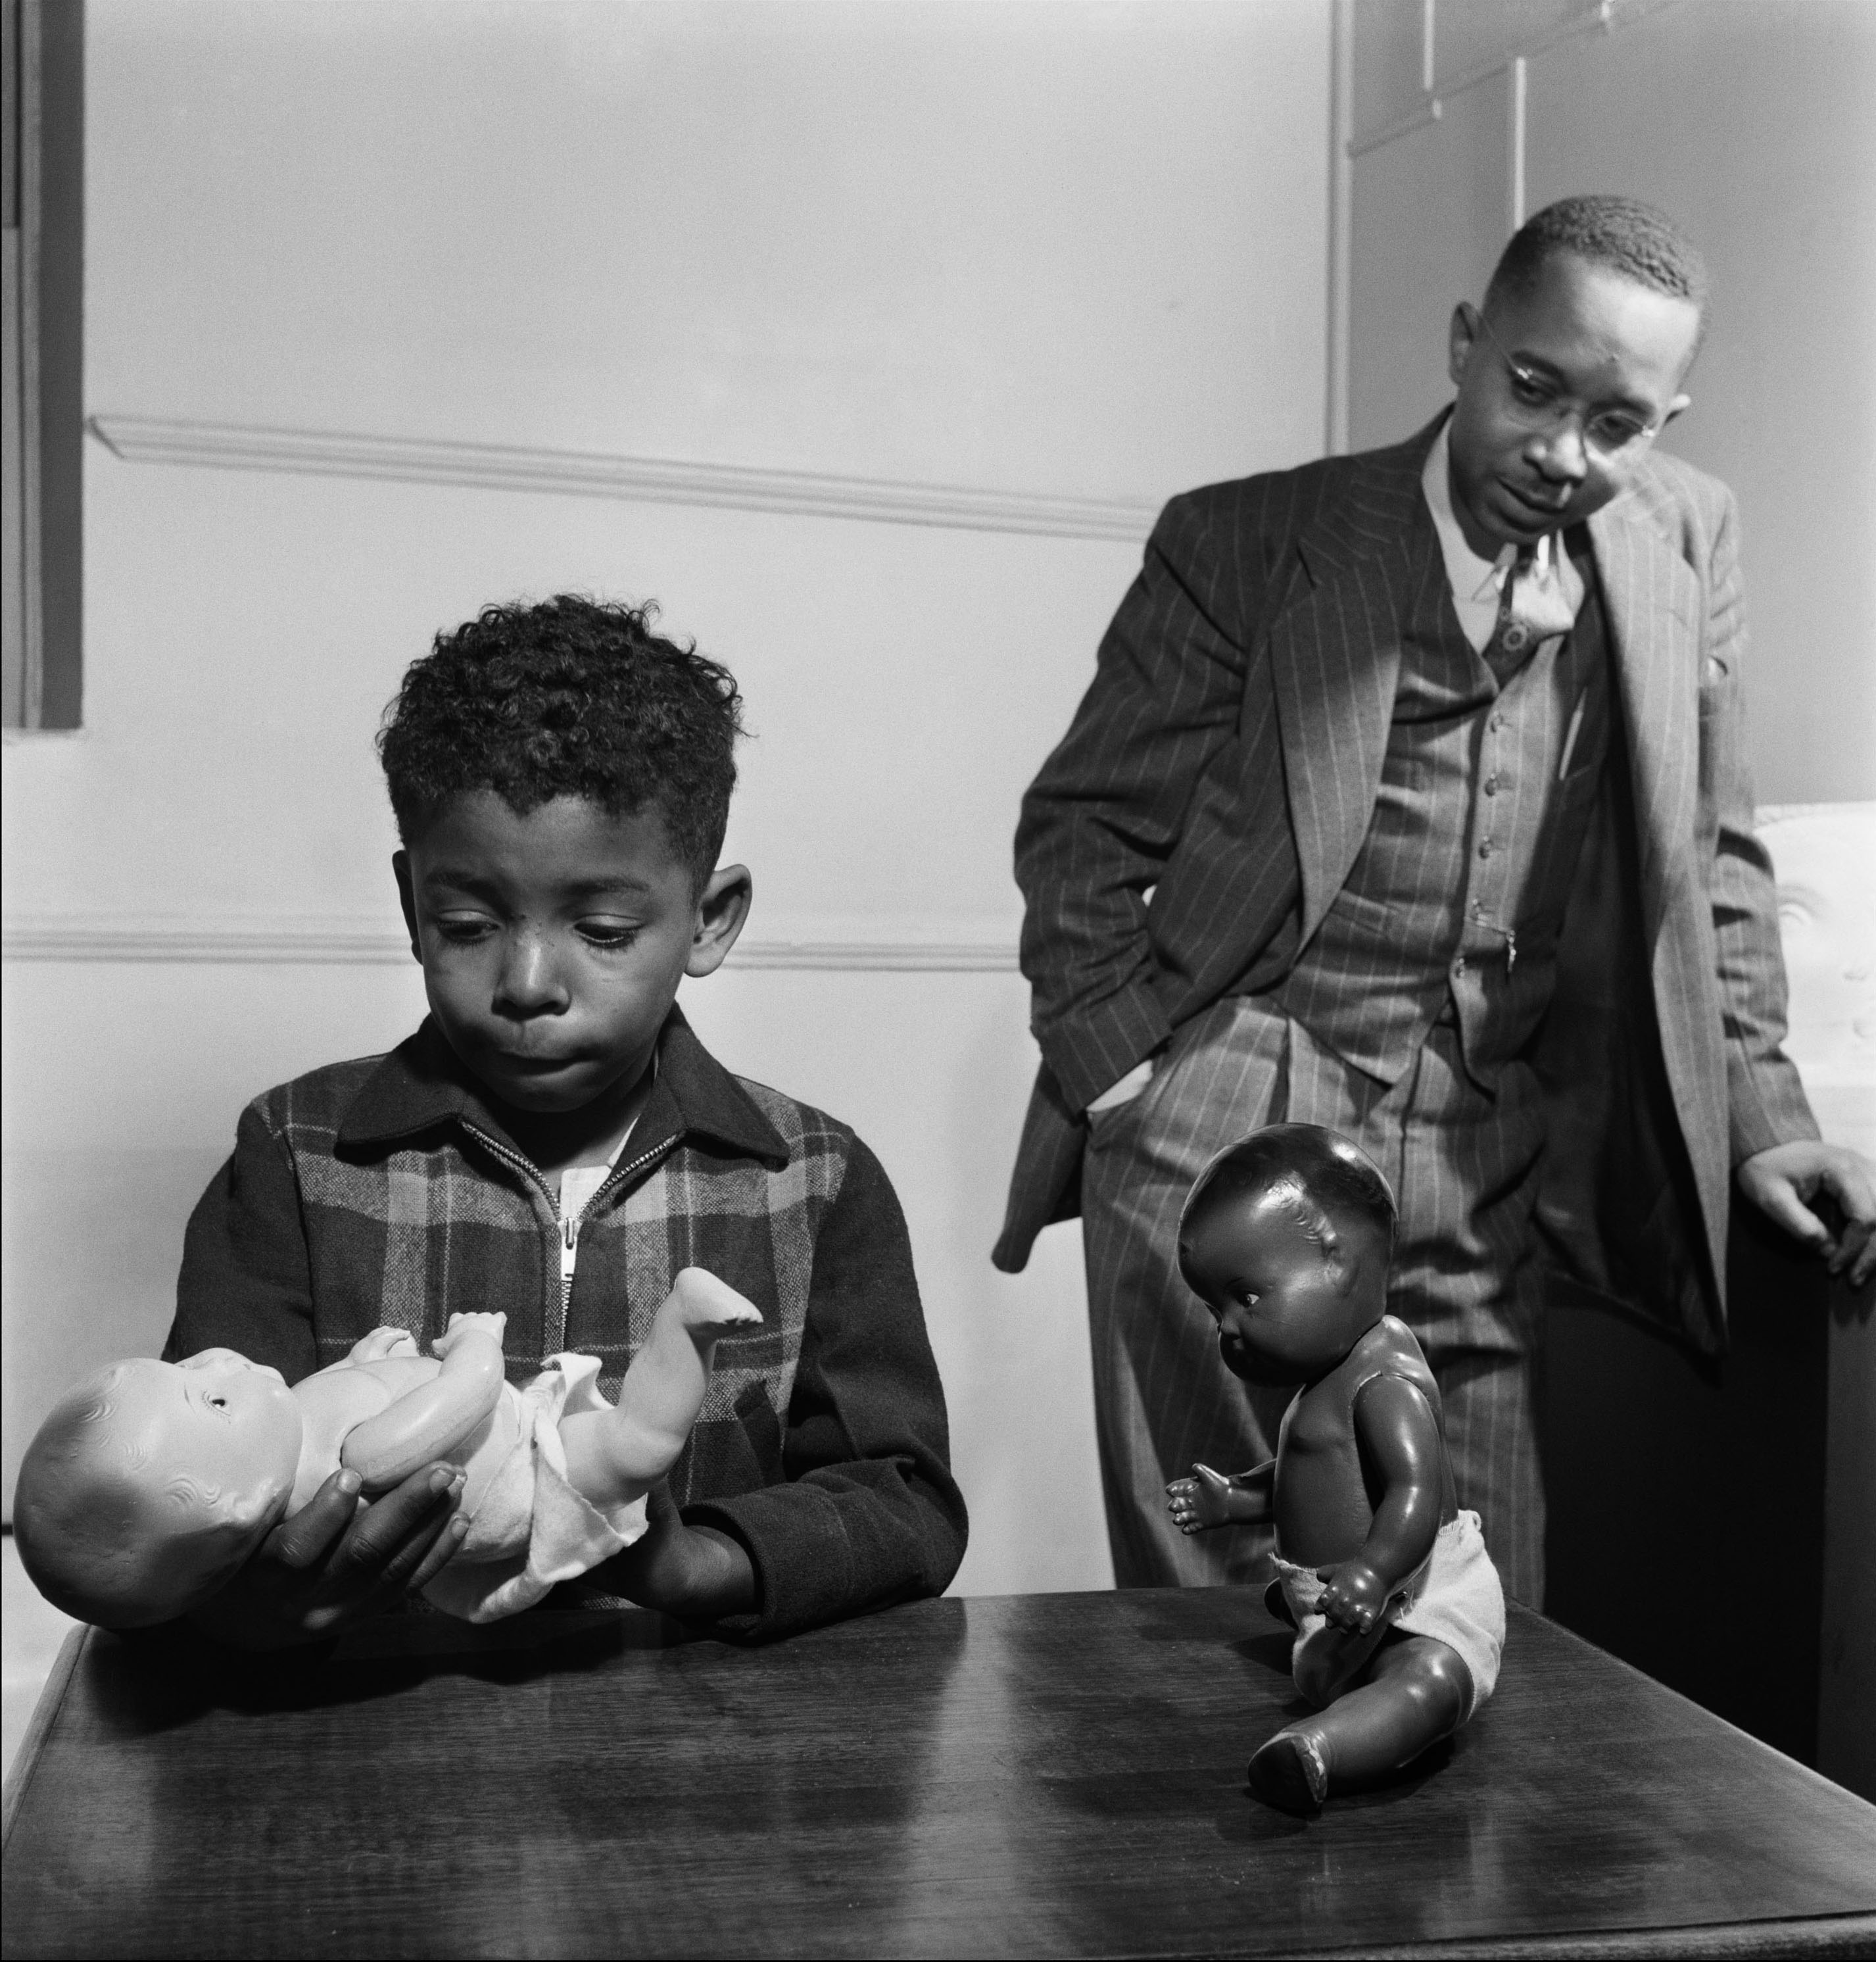 Black boy holds and looks at white baby doll with a Black baby doll sitting nearby on the table and a man in a suit stands in the background observing.